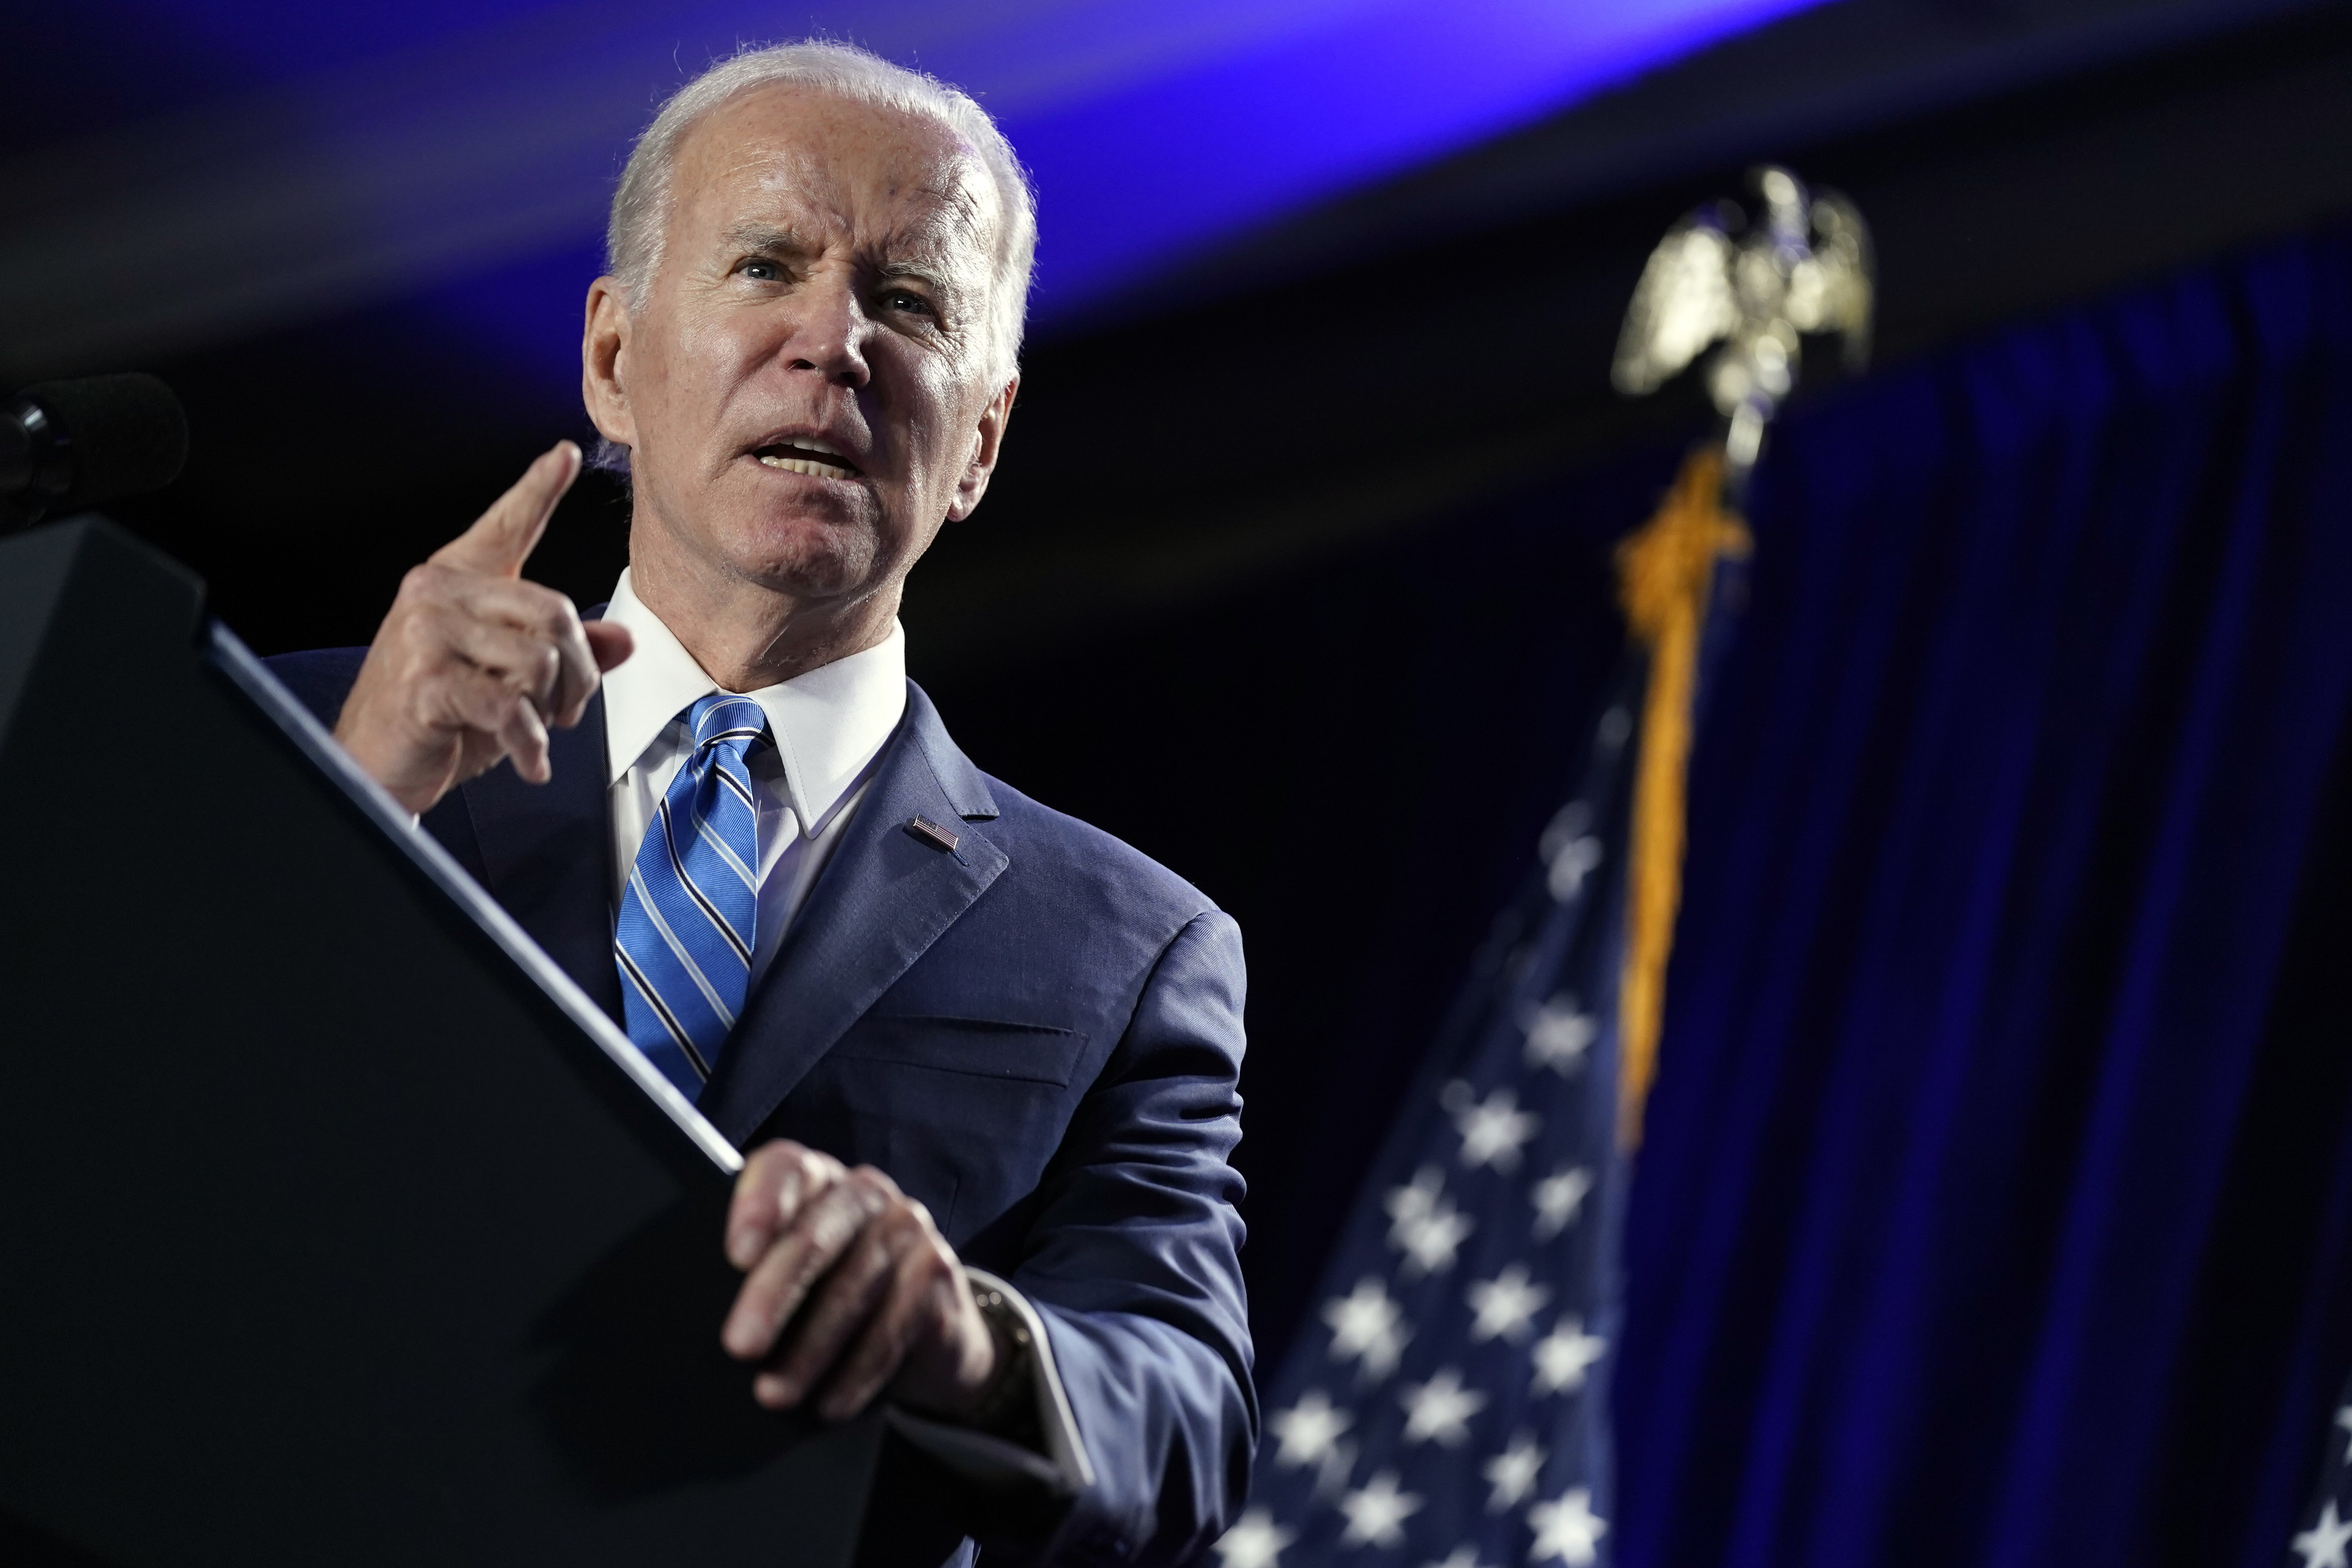 the Beltway: Is Biden too old for second term? Most voters say yes - Washington Times